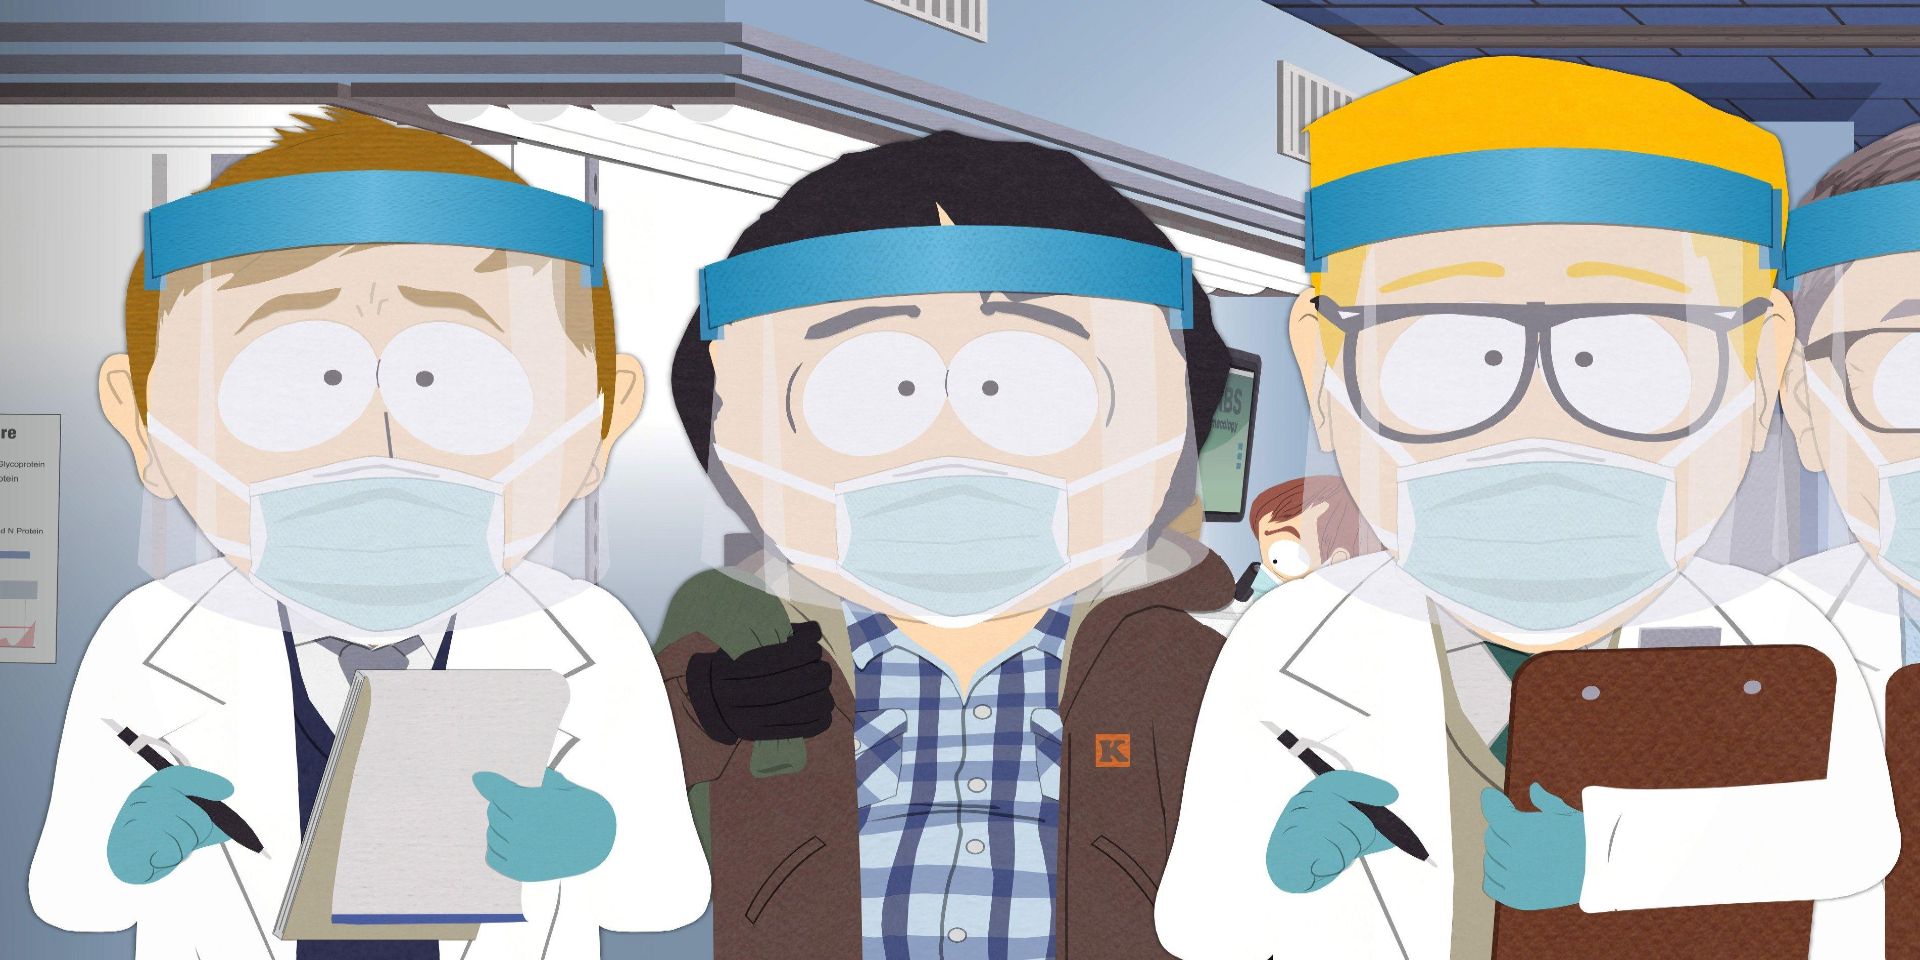 Randy standing in between two scientists with clipboards in South Park.